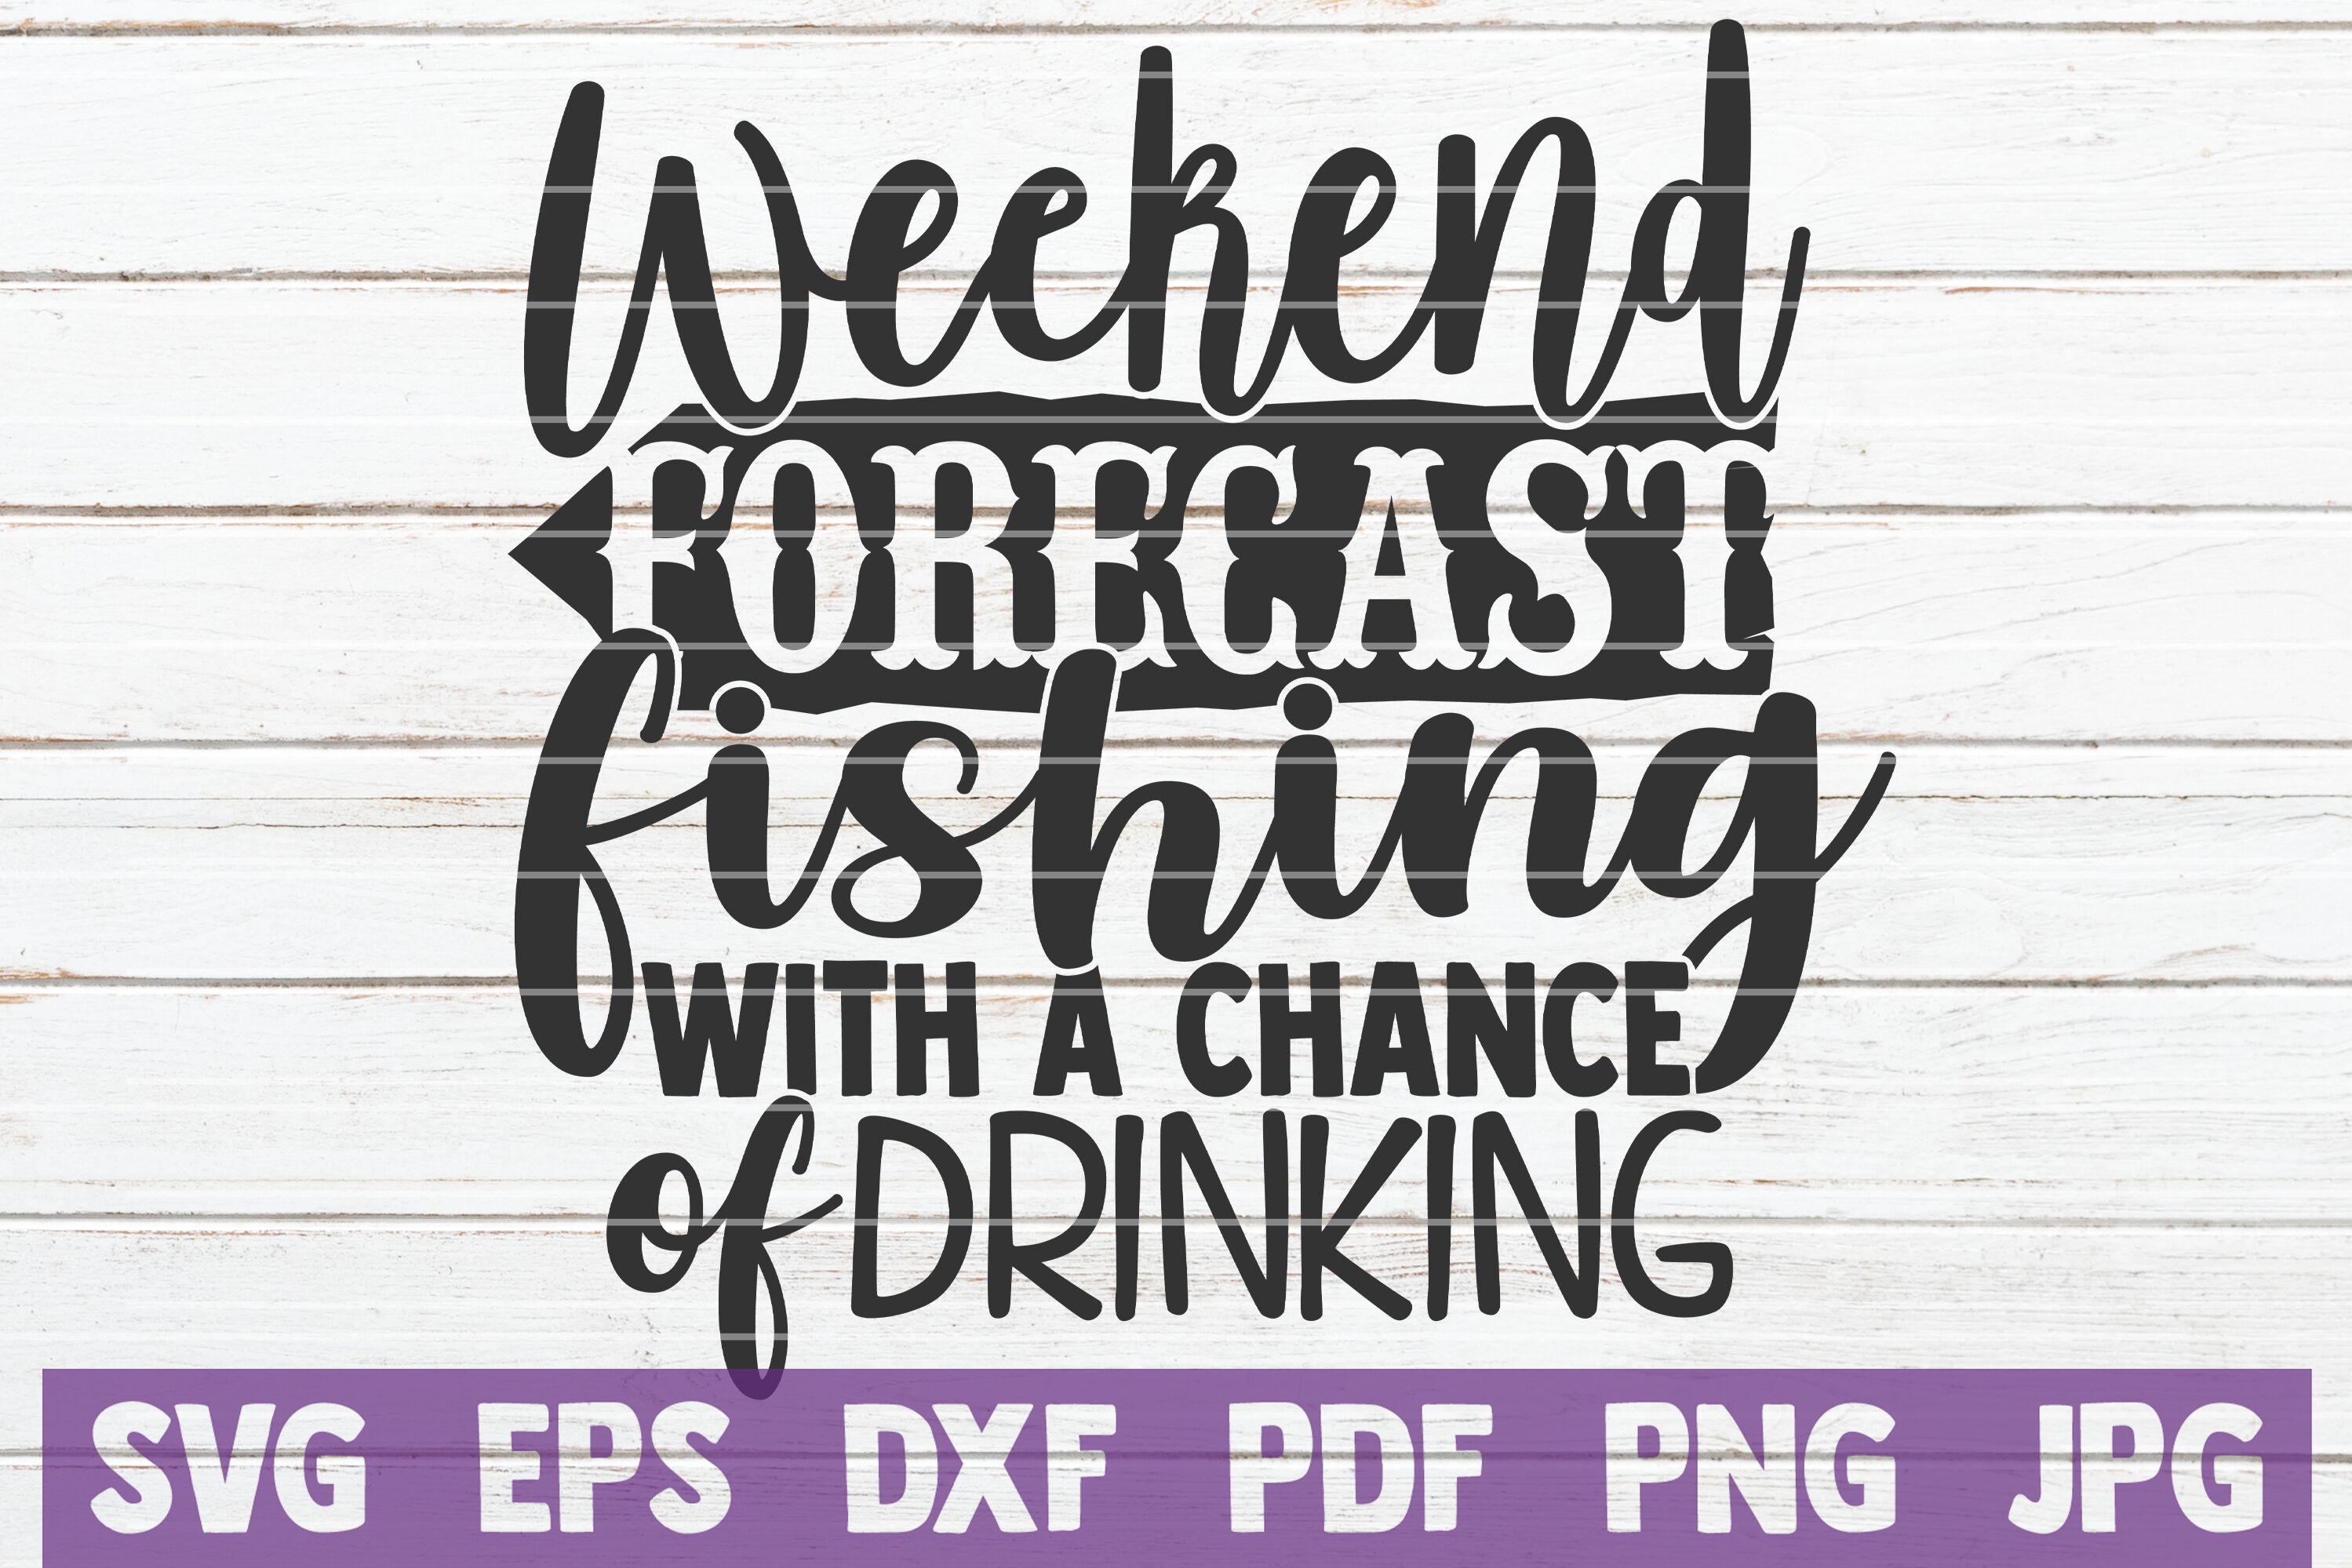 ori 3735322 18rj0uyiht2717dp453k6opai3sc8bn15q120ho9 weekend forecast fishing with a chance of drinking svg cut file